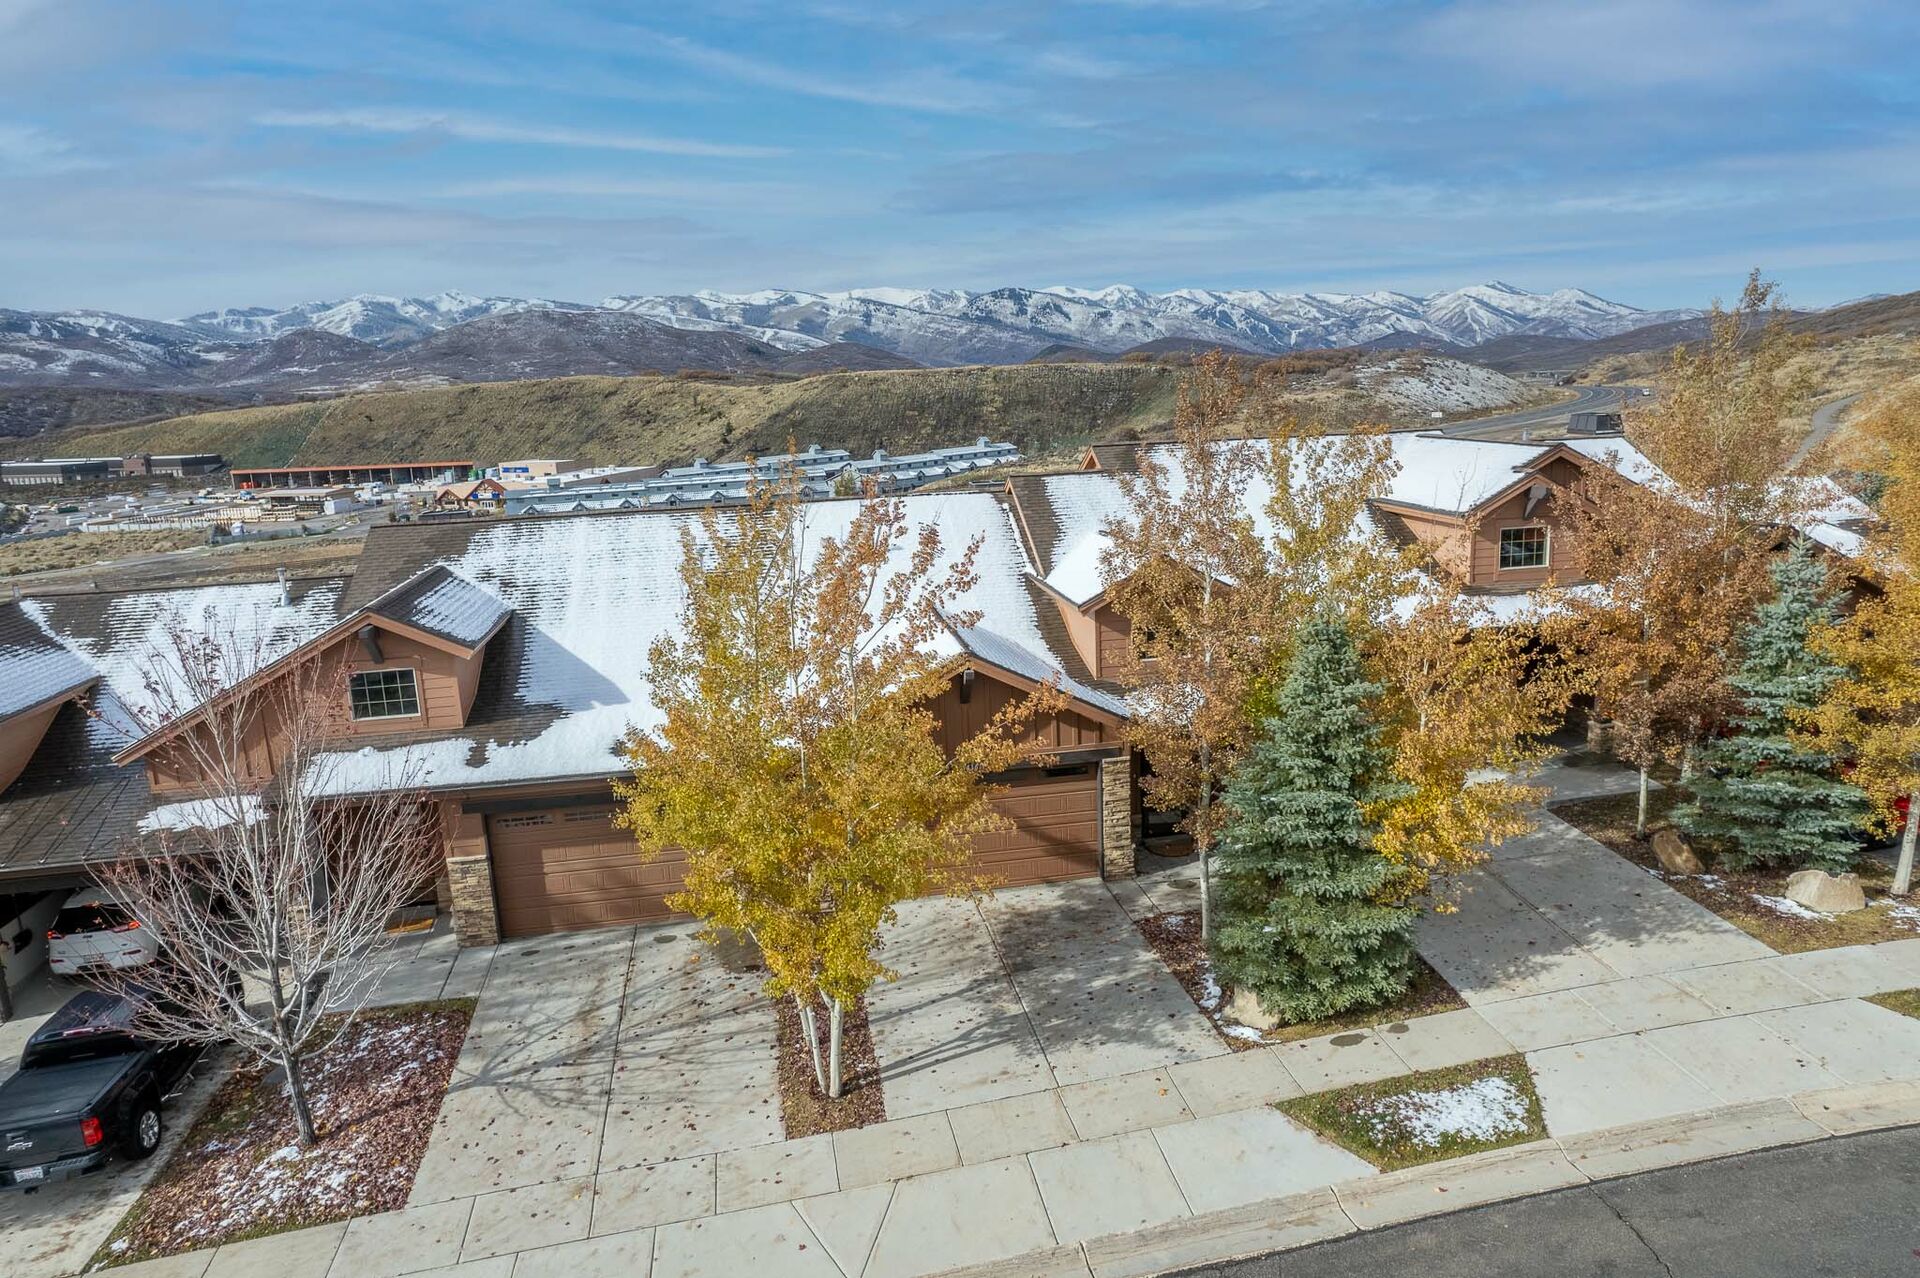 Aerial view of driveway looking out at mountains